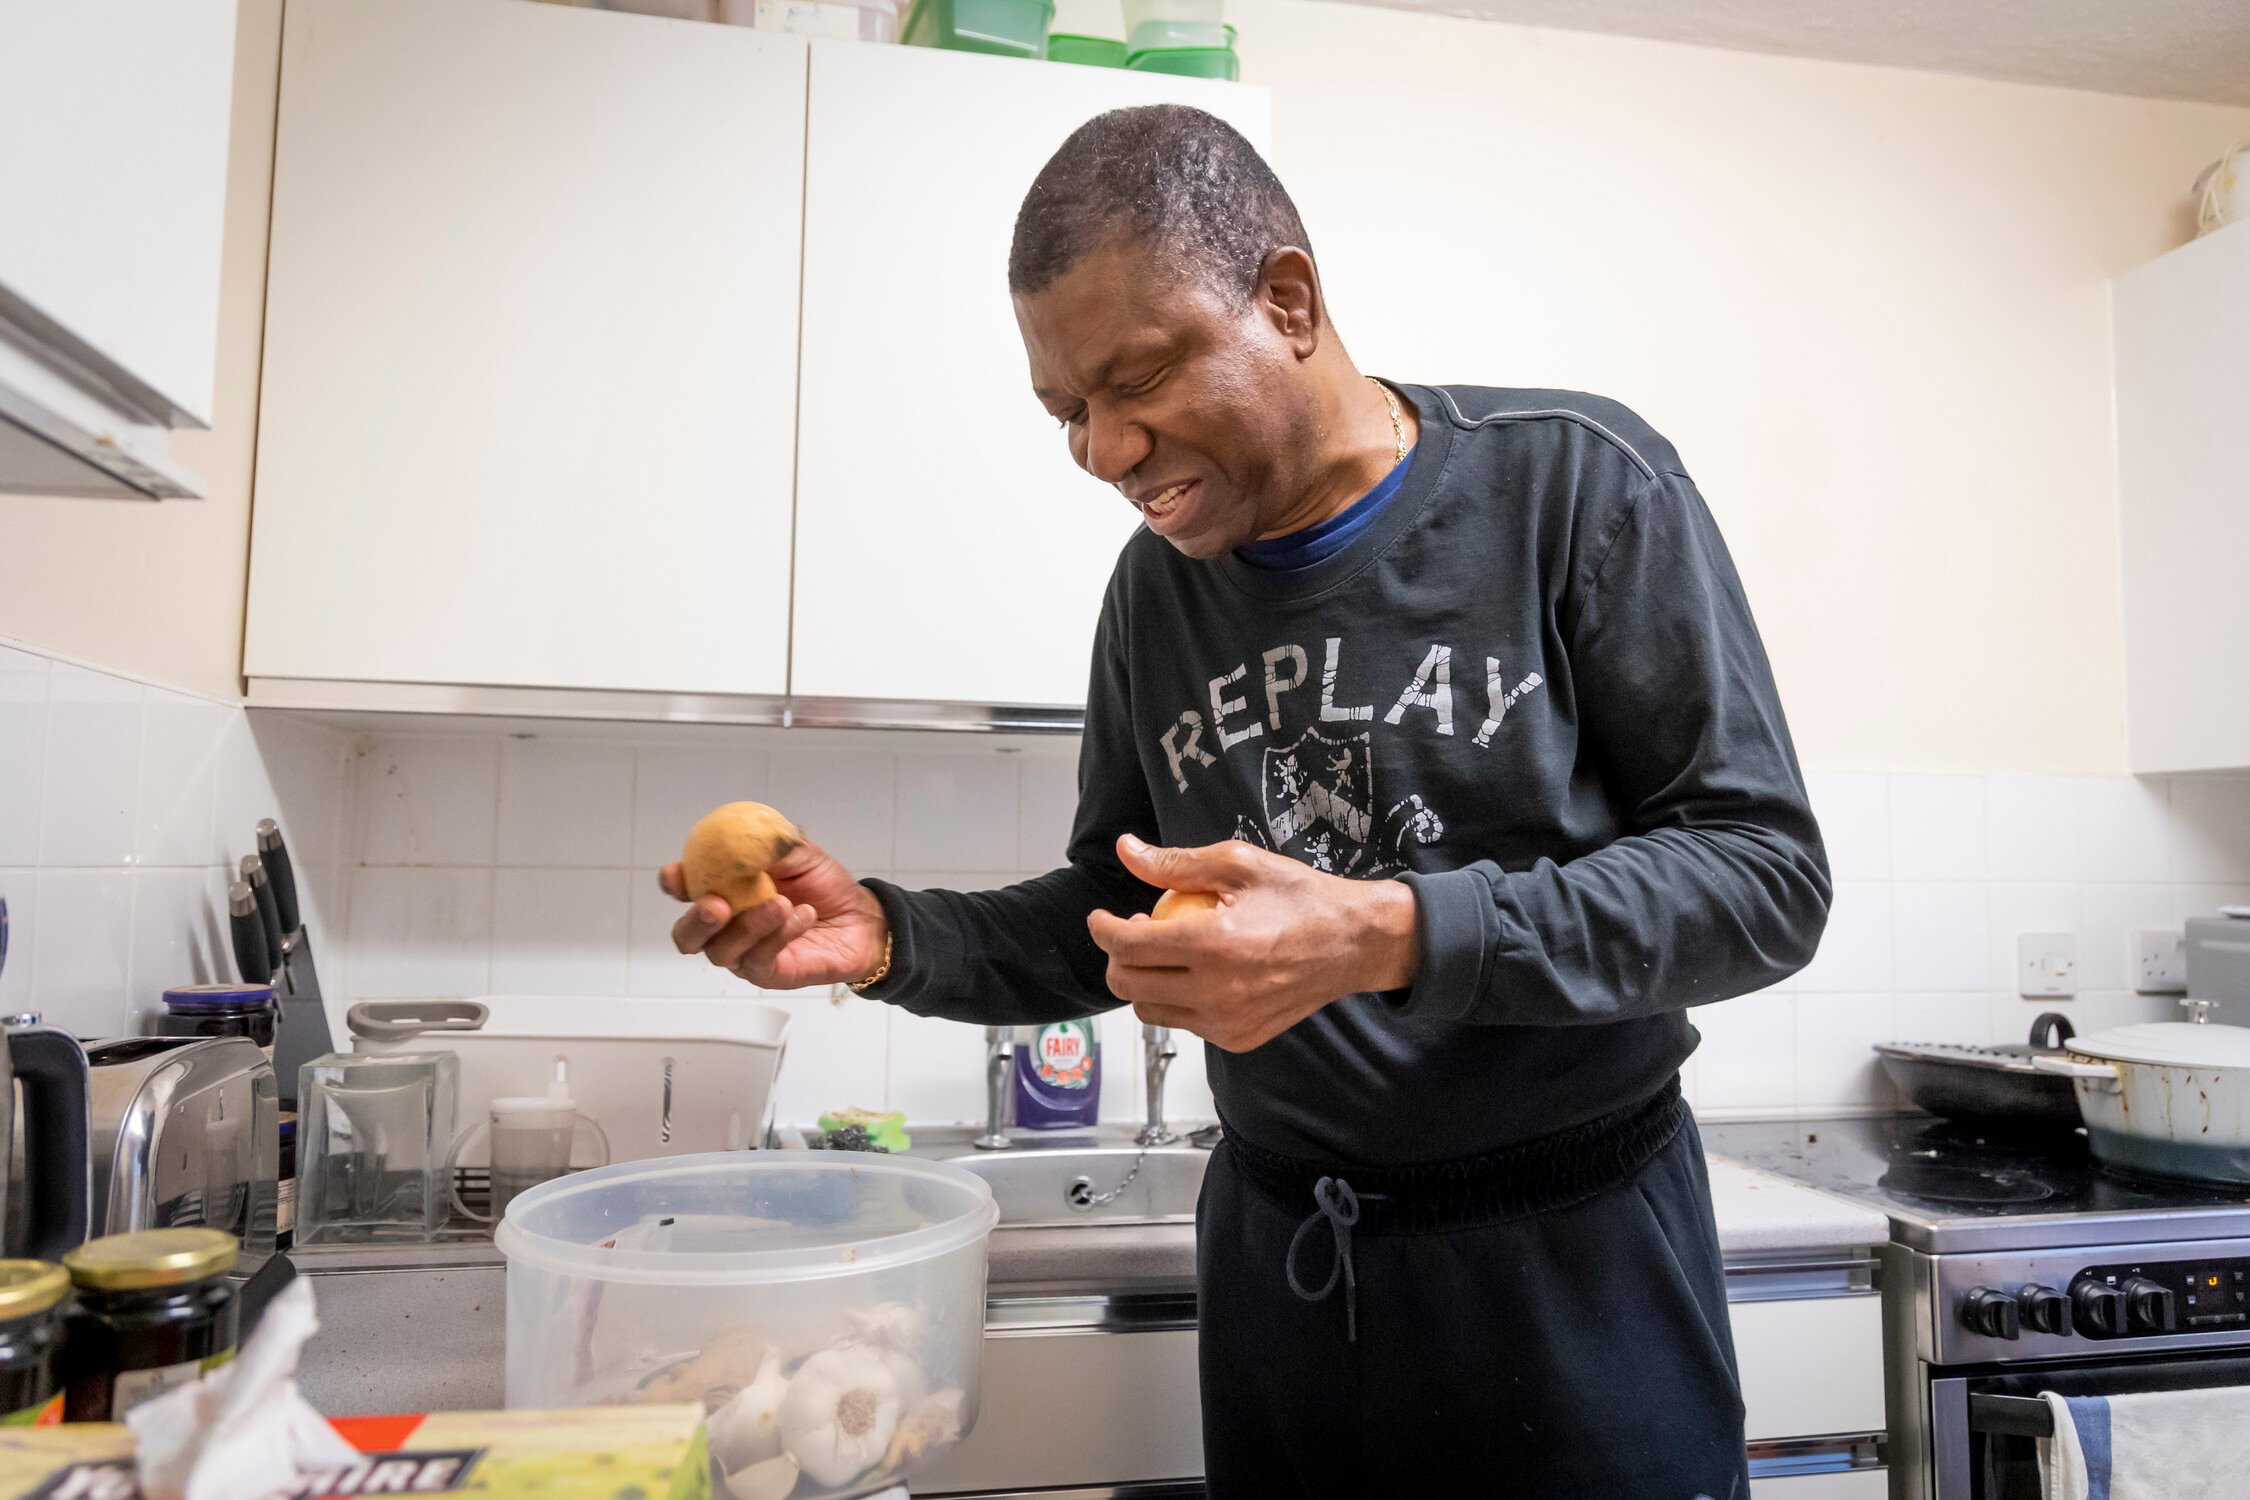 Older man with sensory impairment in kitchen cooking